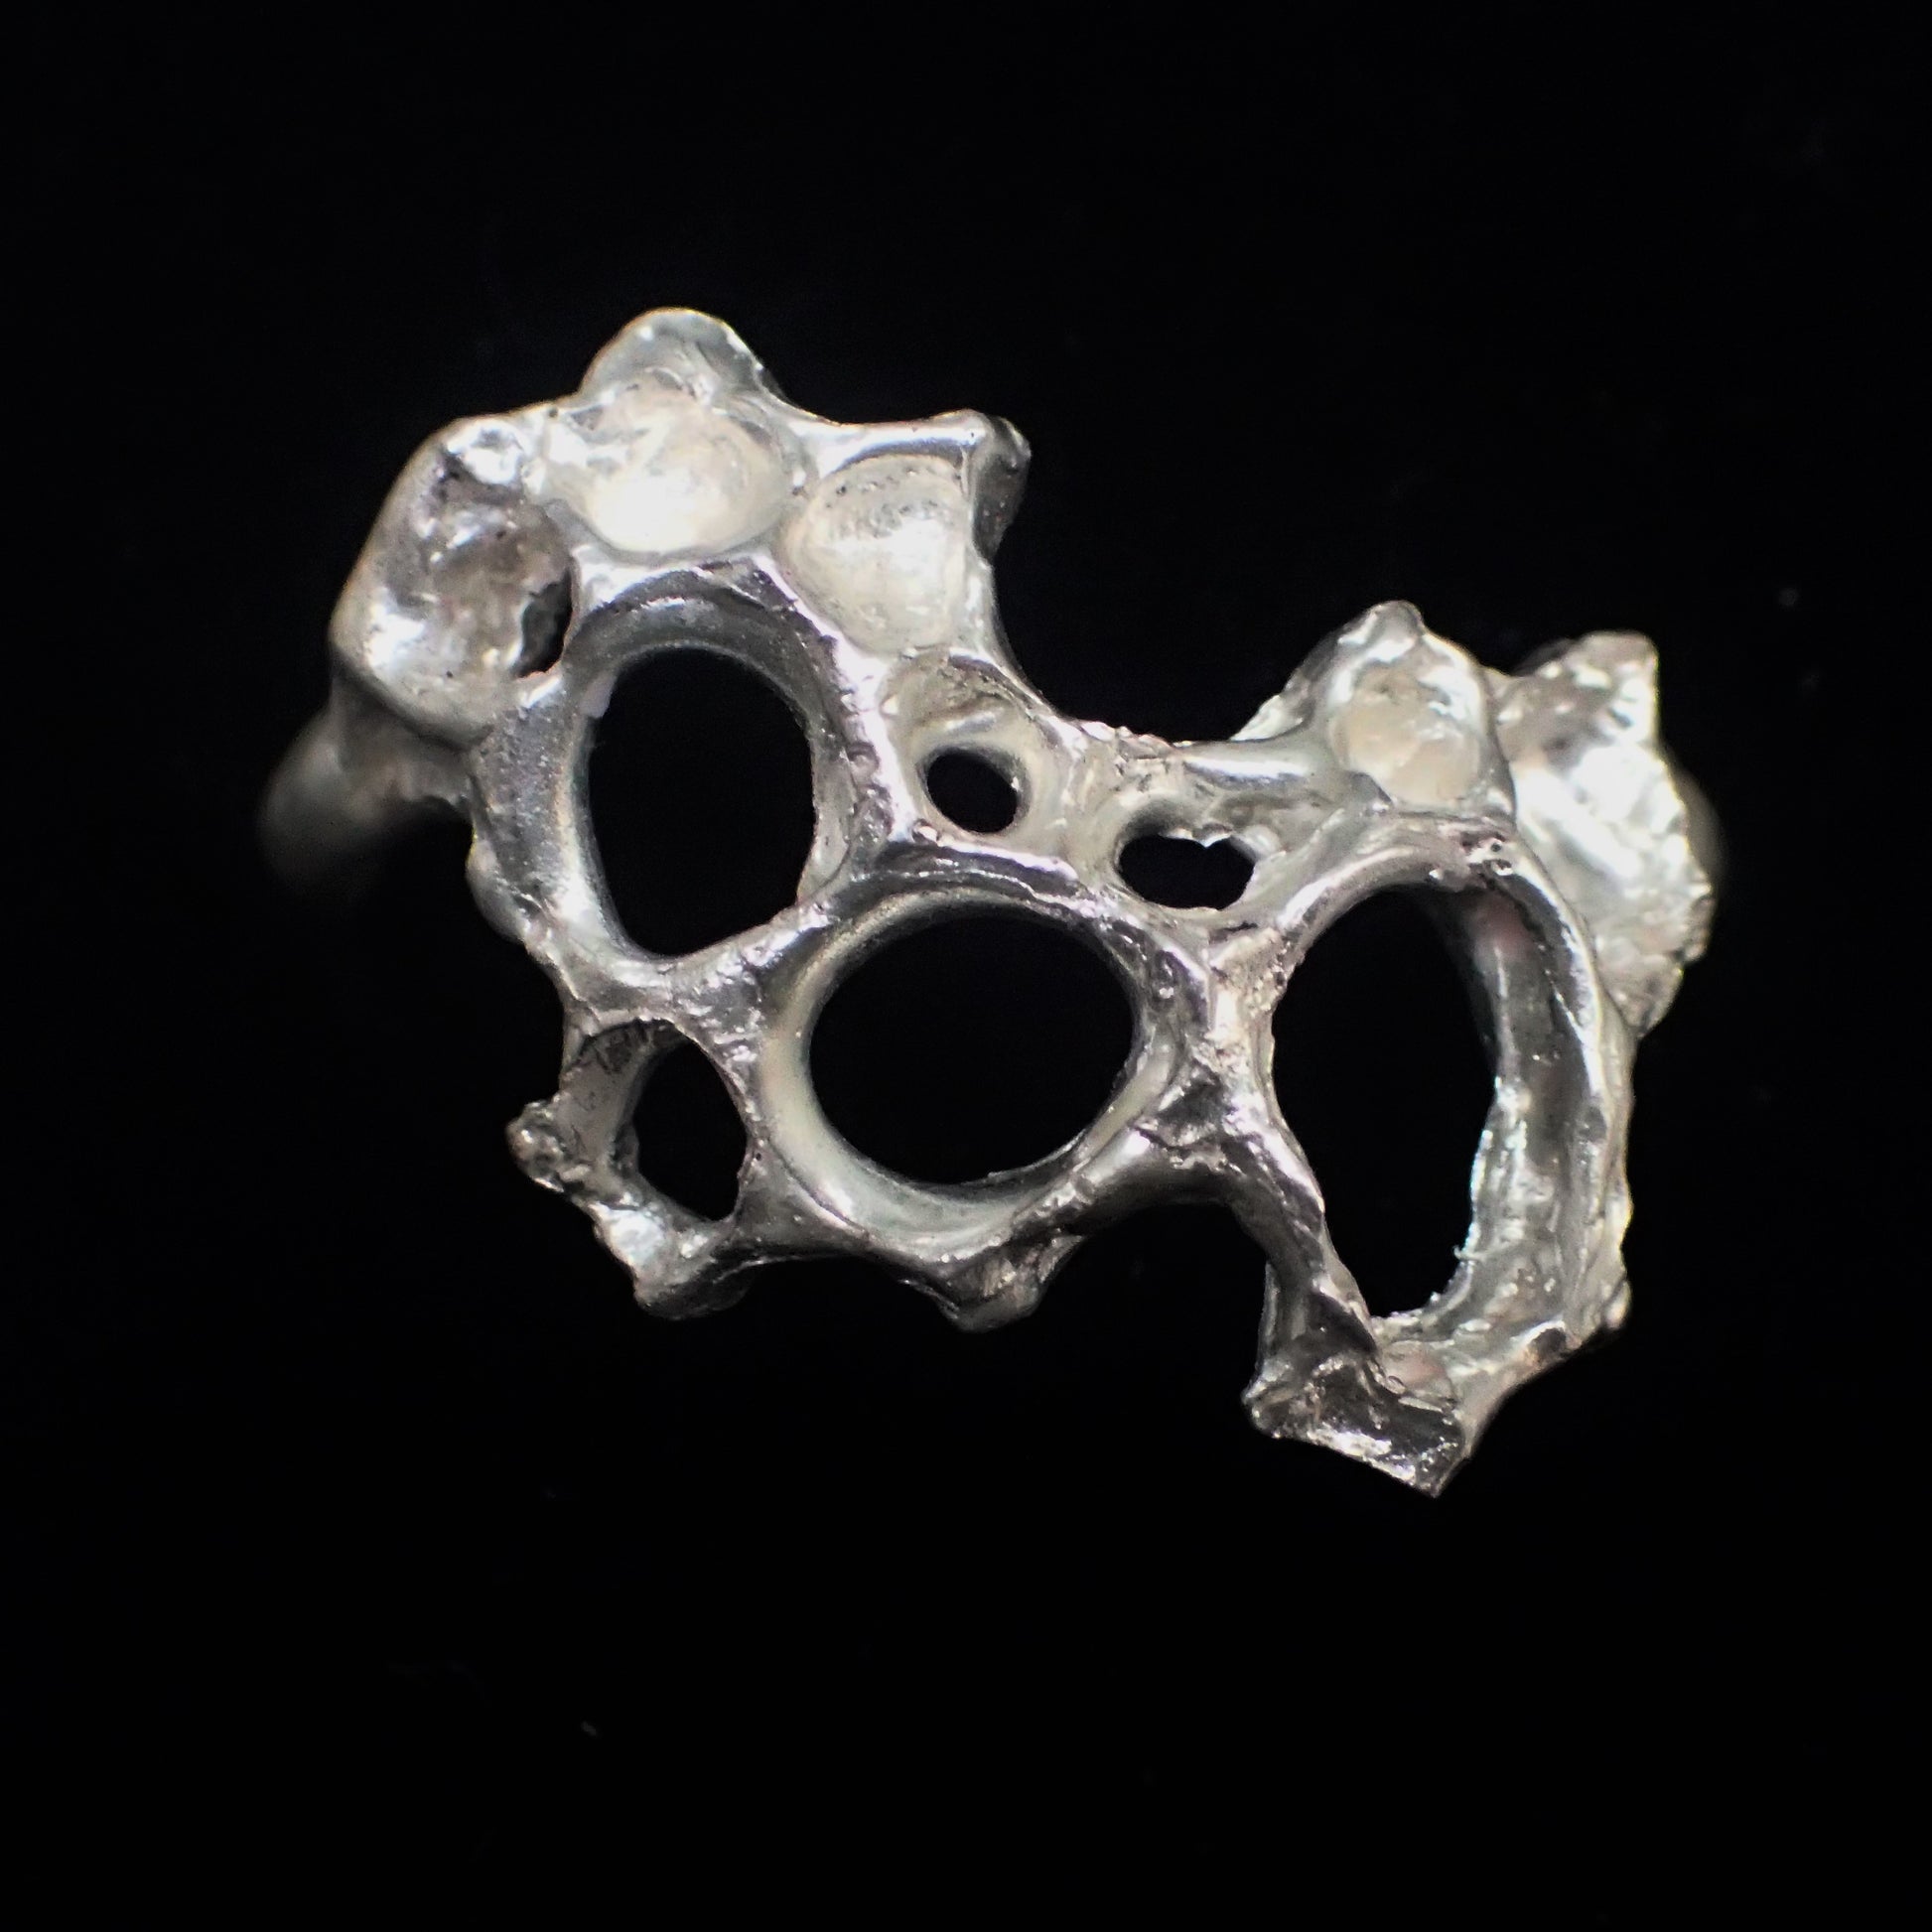 Delicate Honeycomb Ring handmade in solid Ecosilver-Jewellery-Beca Beeby